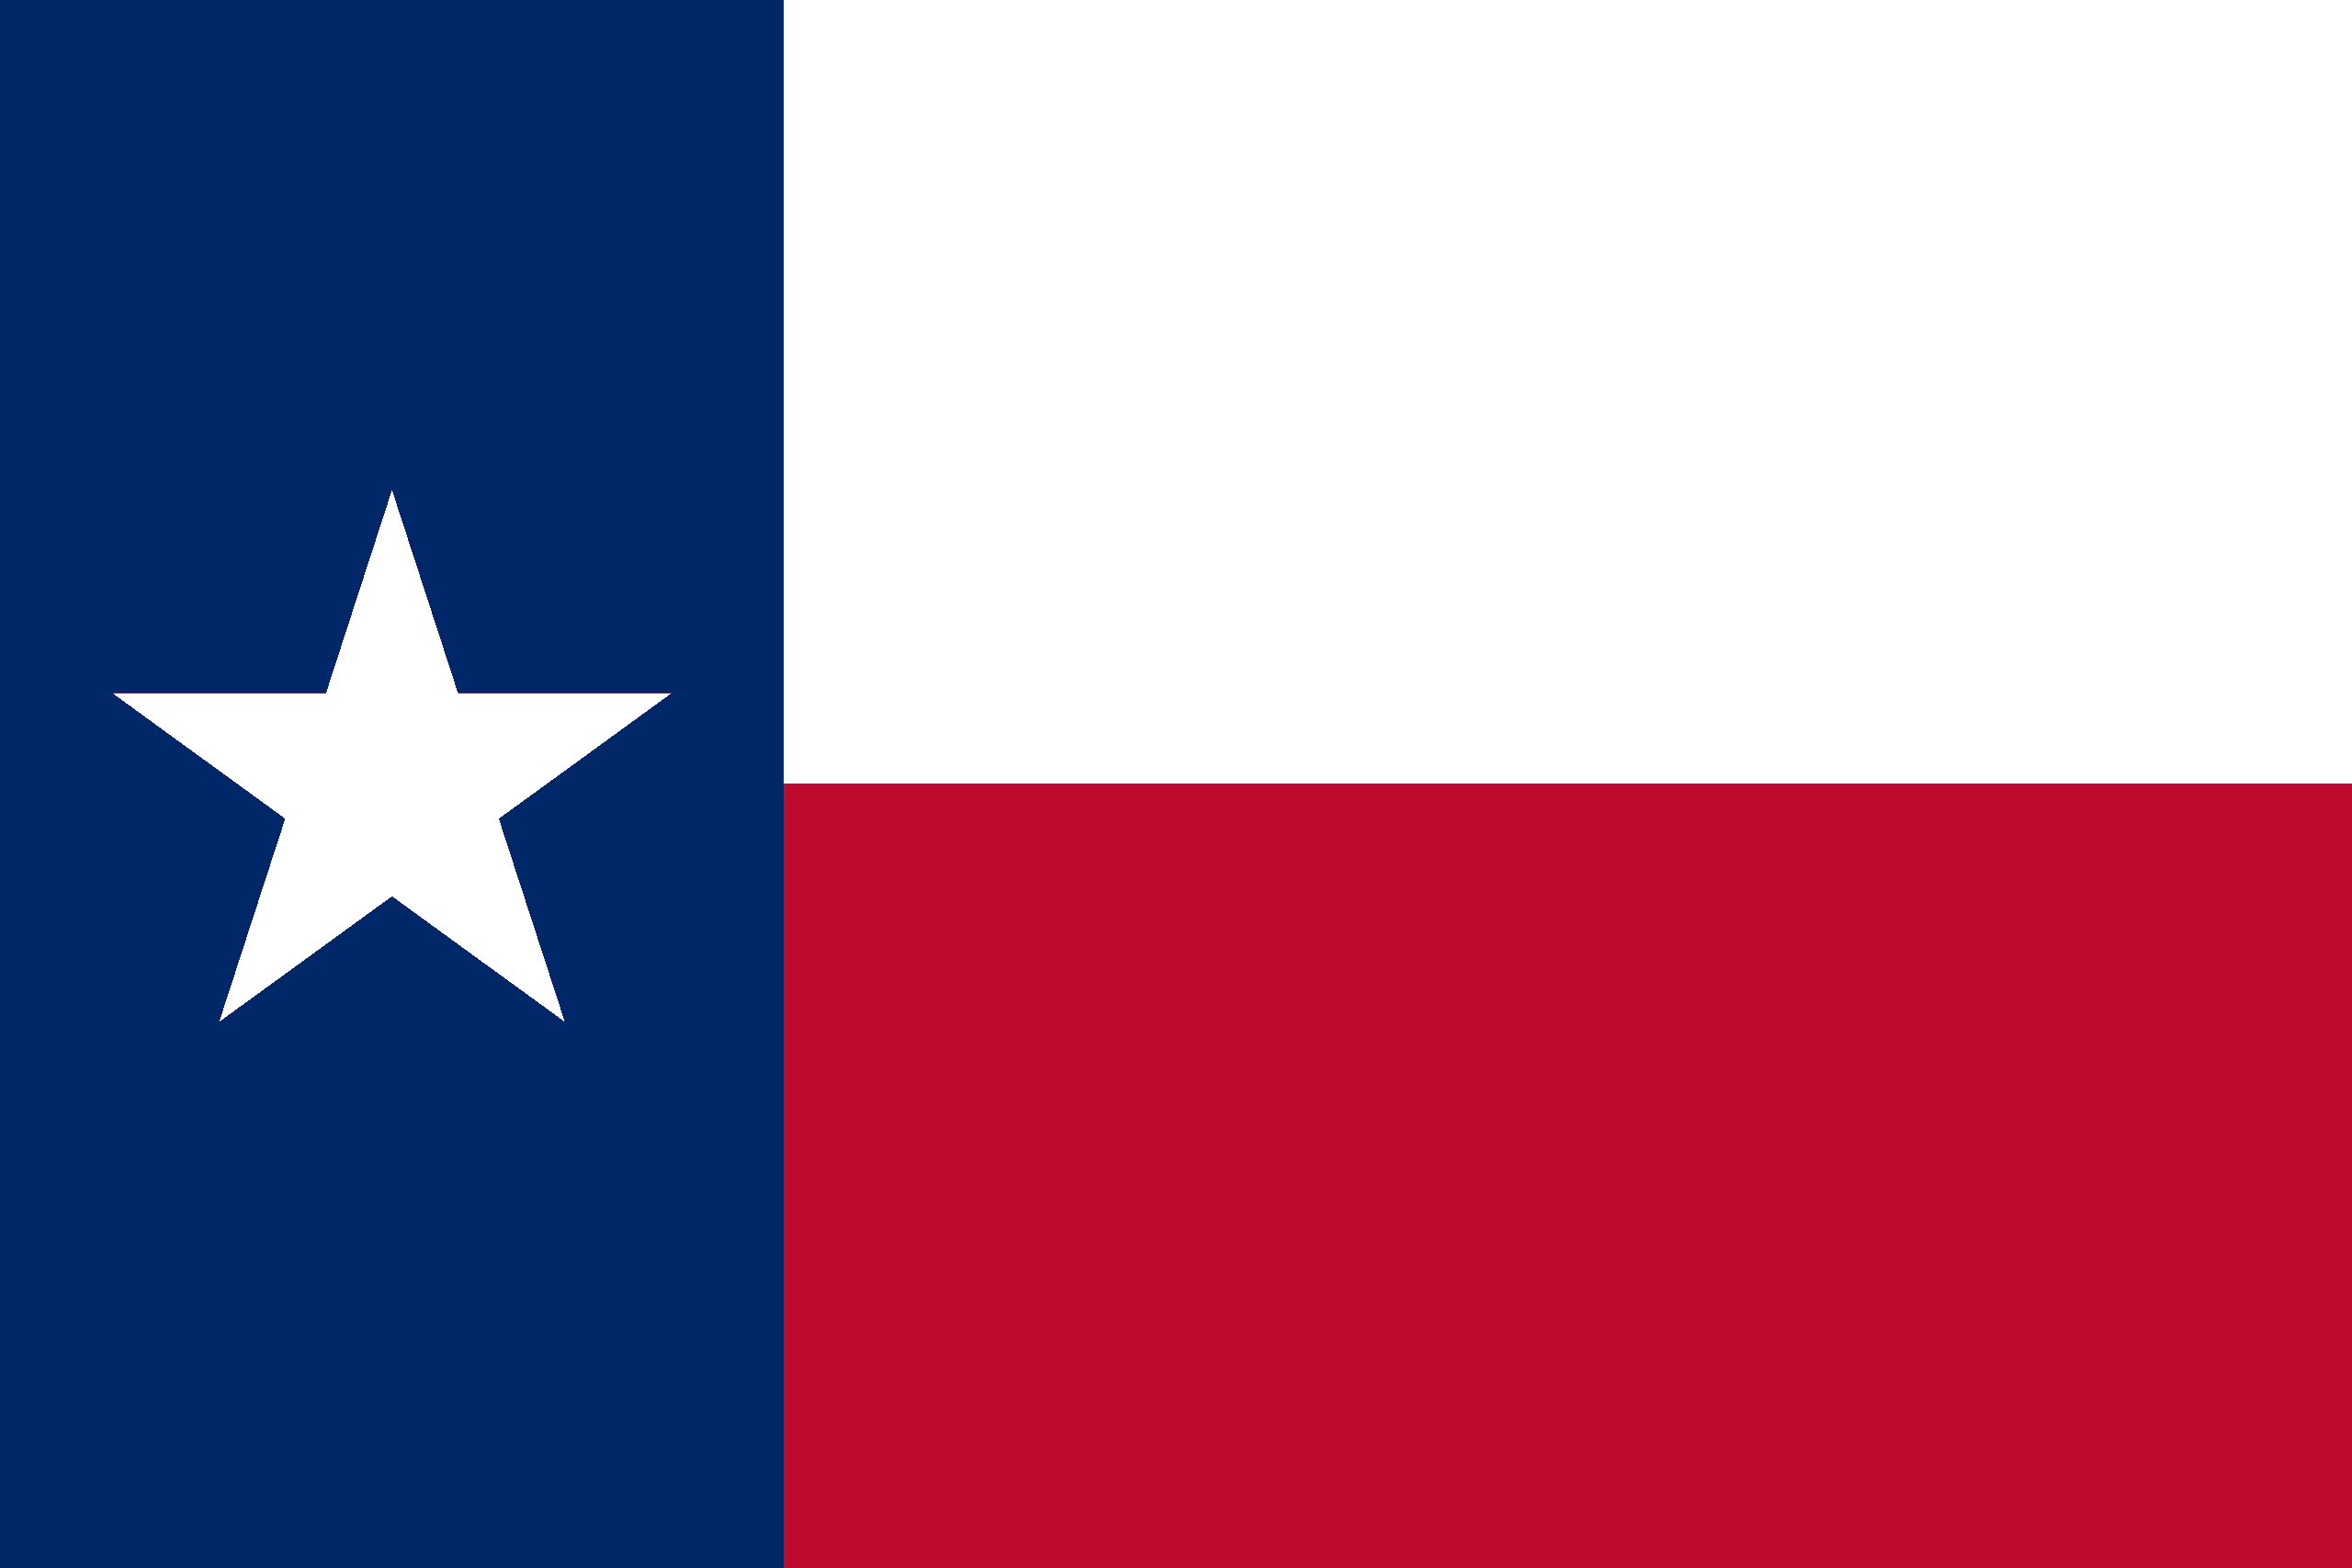 Drone Laws in Texas